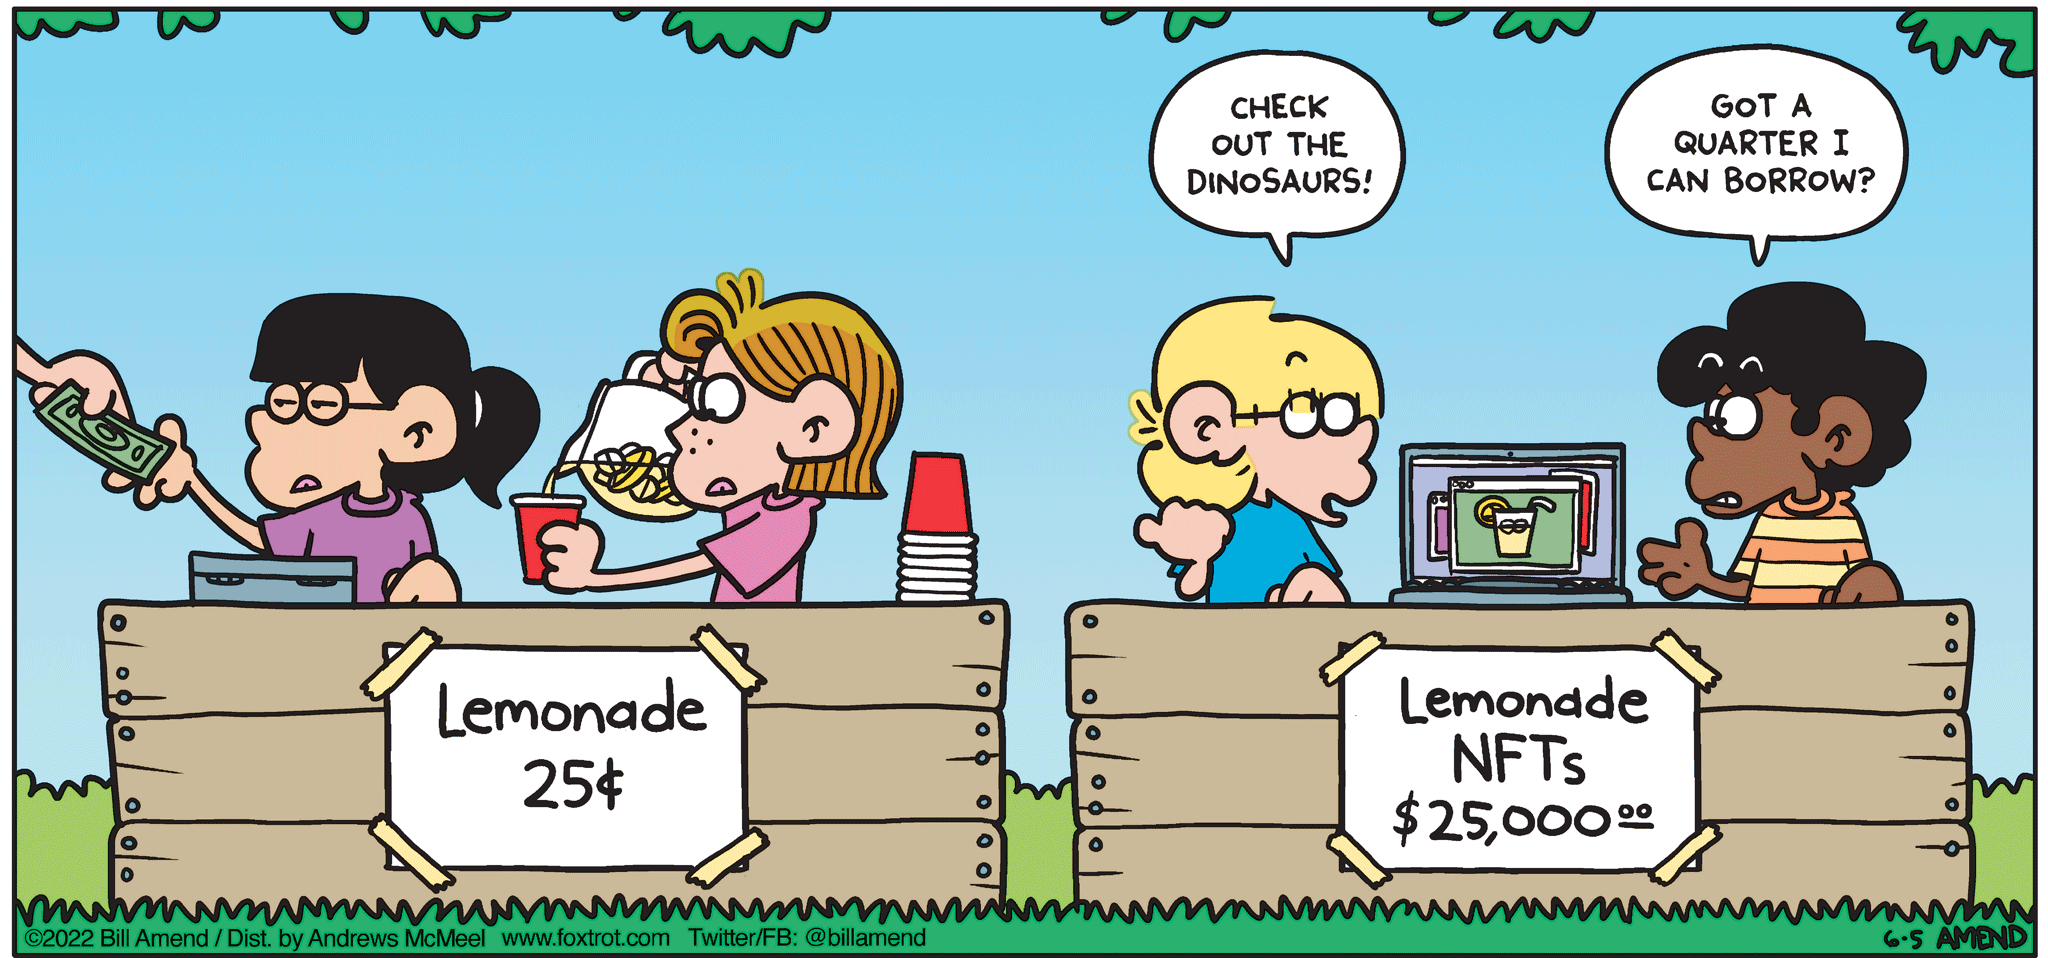 FoxTrot comic strip by Bill Amend - "When Life Gives You Lemon JPEGs" published June 5, 2022 - Transcript: Jason Fox: Check out the dinosaurs! Marcus Jones: Got a quarter I can borrow? [Accessibility: Eileen and Phoebe and Jason and Marcus have competing lemonade stands set up next to each other, except Jason and Marcus are selling NFTs of Lemonade, instead of physical lemonade] 